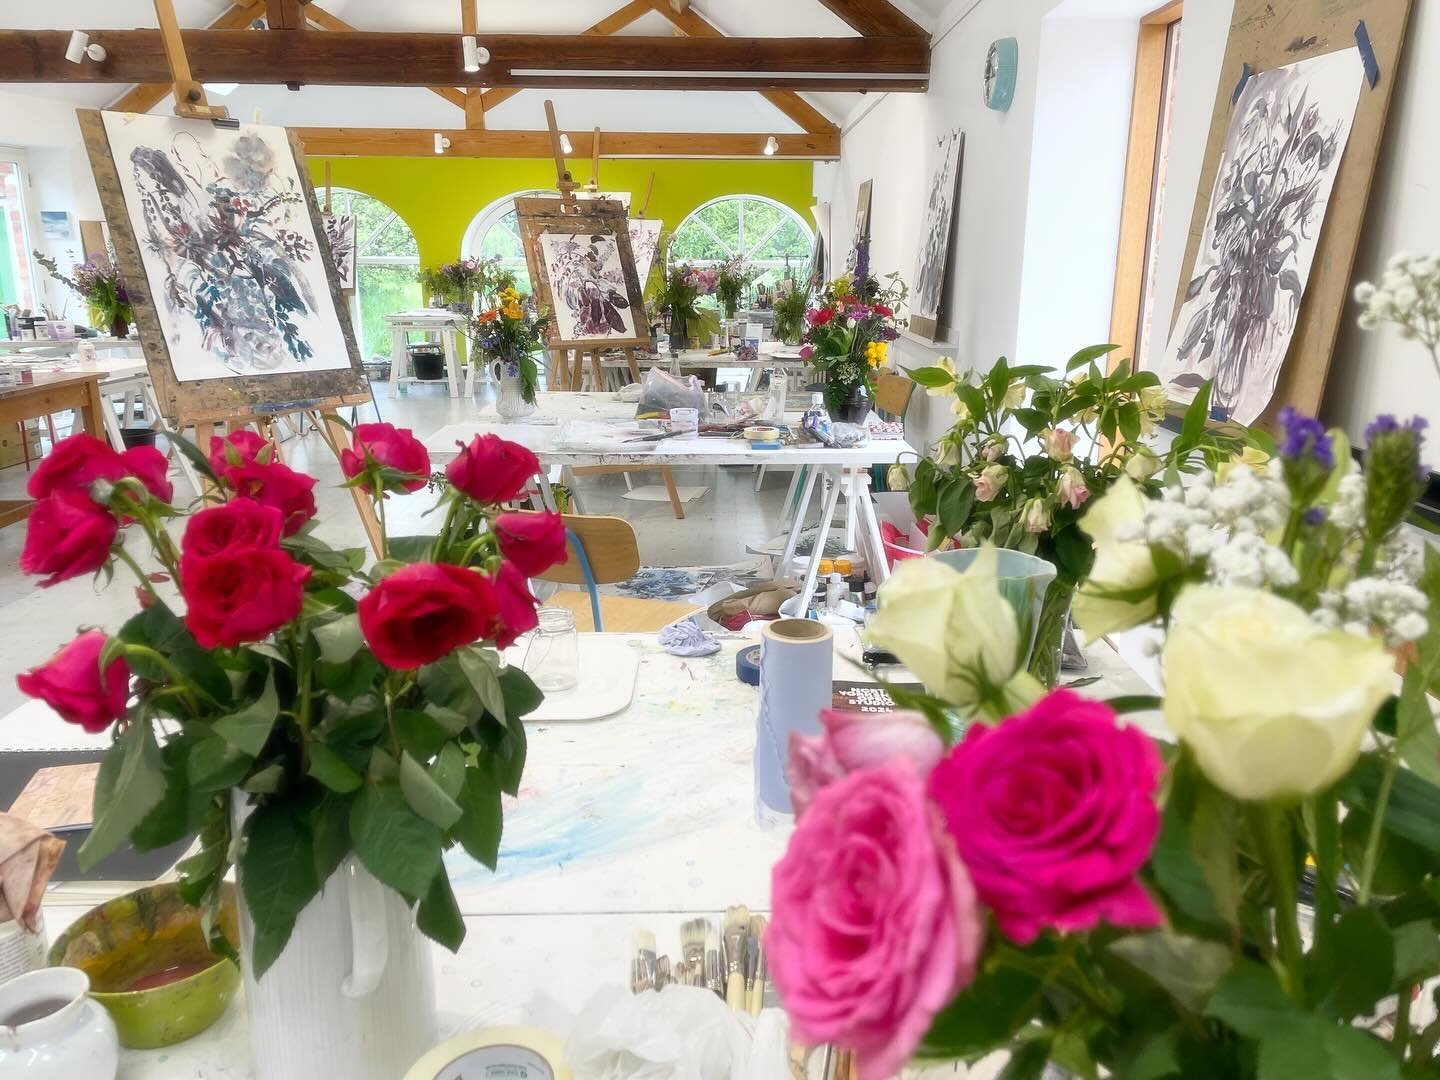 The early morning calm before the creative buzz fills the studio - heading into day 2 with Emily Ball &lsquo;A Fistful of Flowers&rsquo;. 

@emilyballpainting #paintingcourse #paintingworkshop #creativecourses